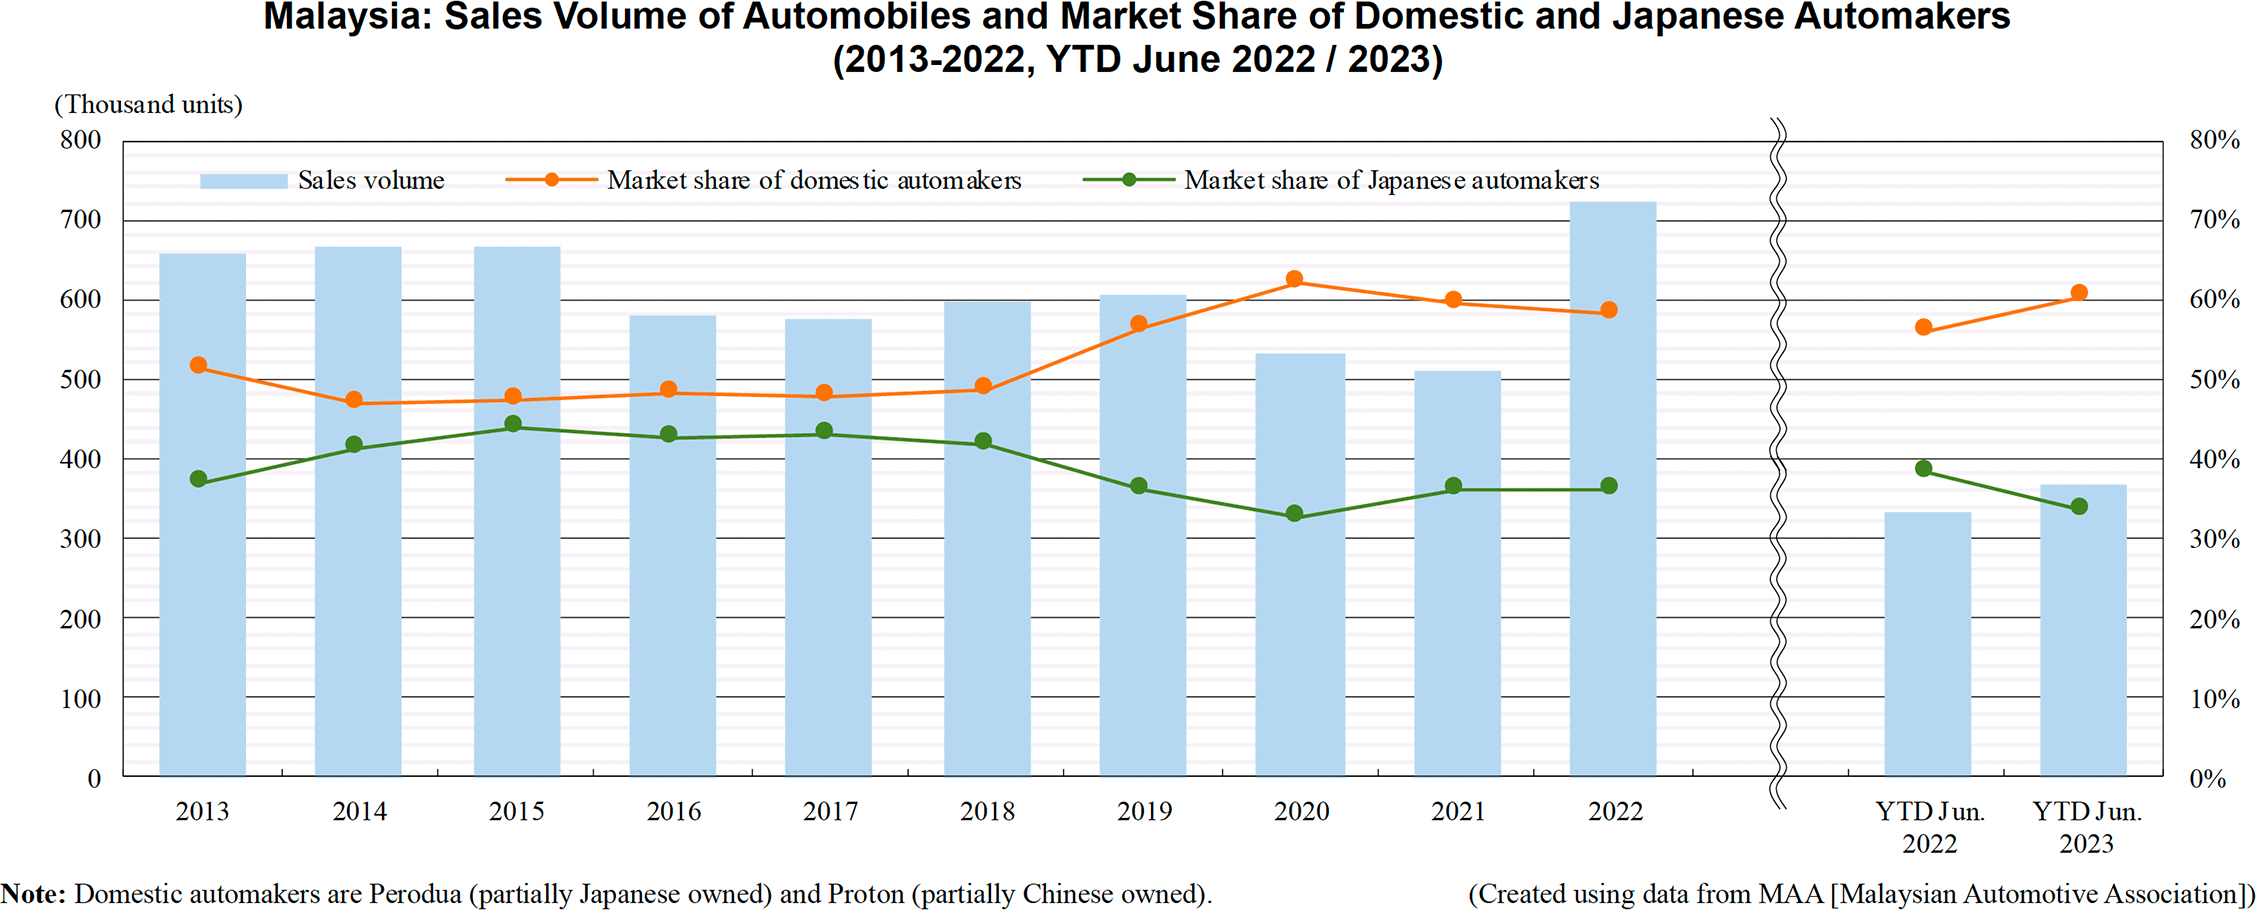 Graph: Malaysia: Sales Volume of Automobiles and Market Share of Domestic and Japanese Automakers (2013-2022, YTD June 2022 / 2023)